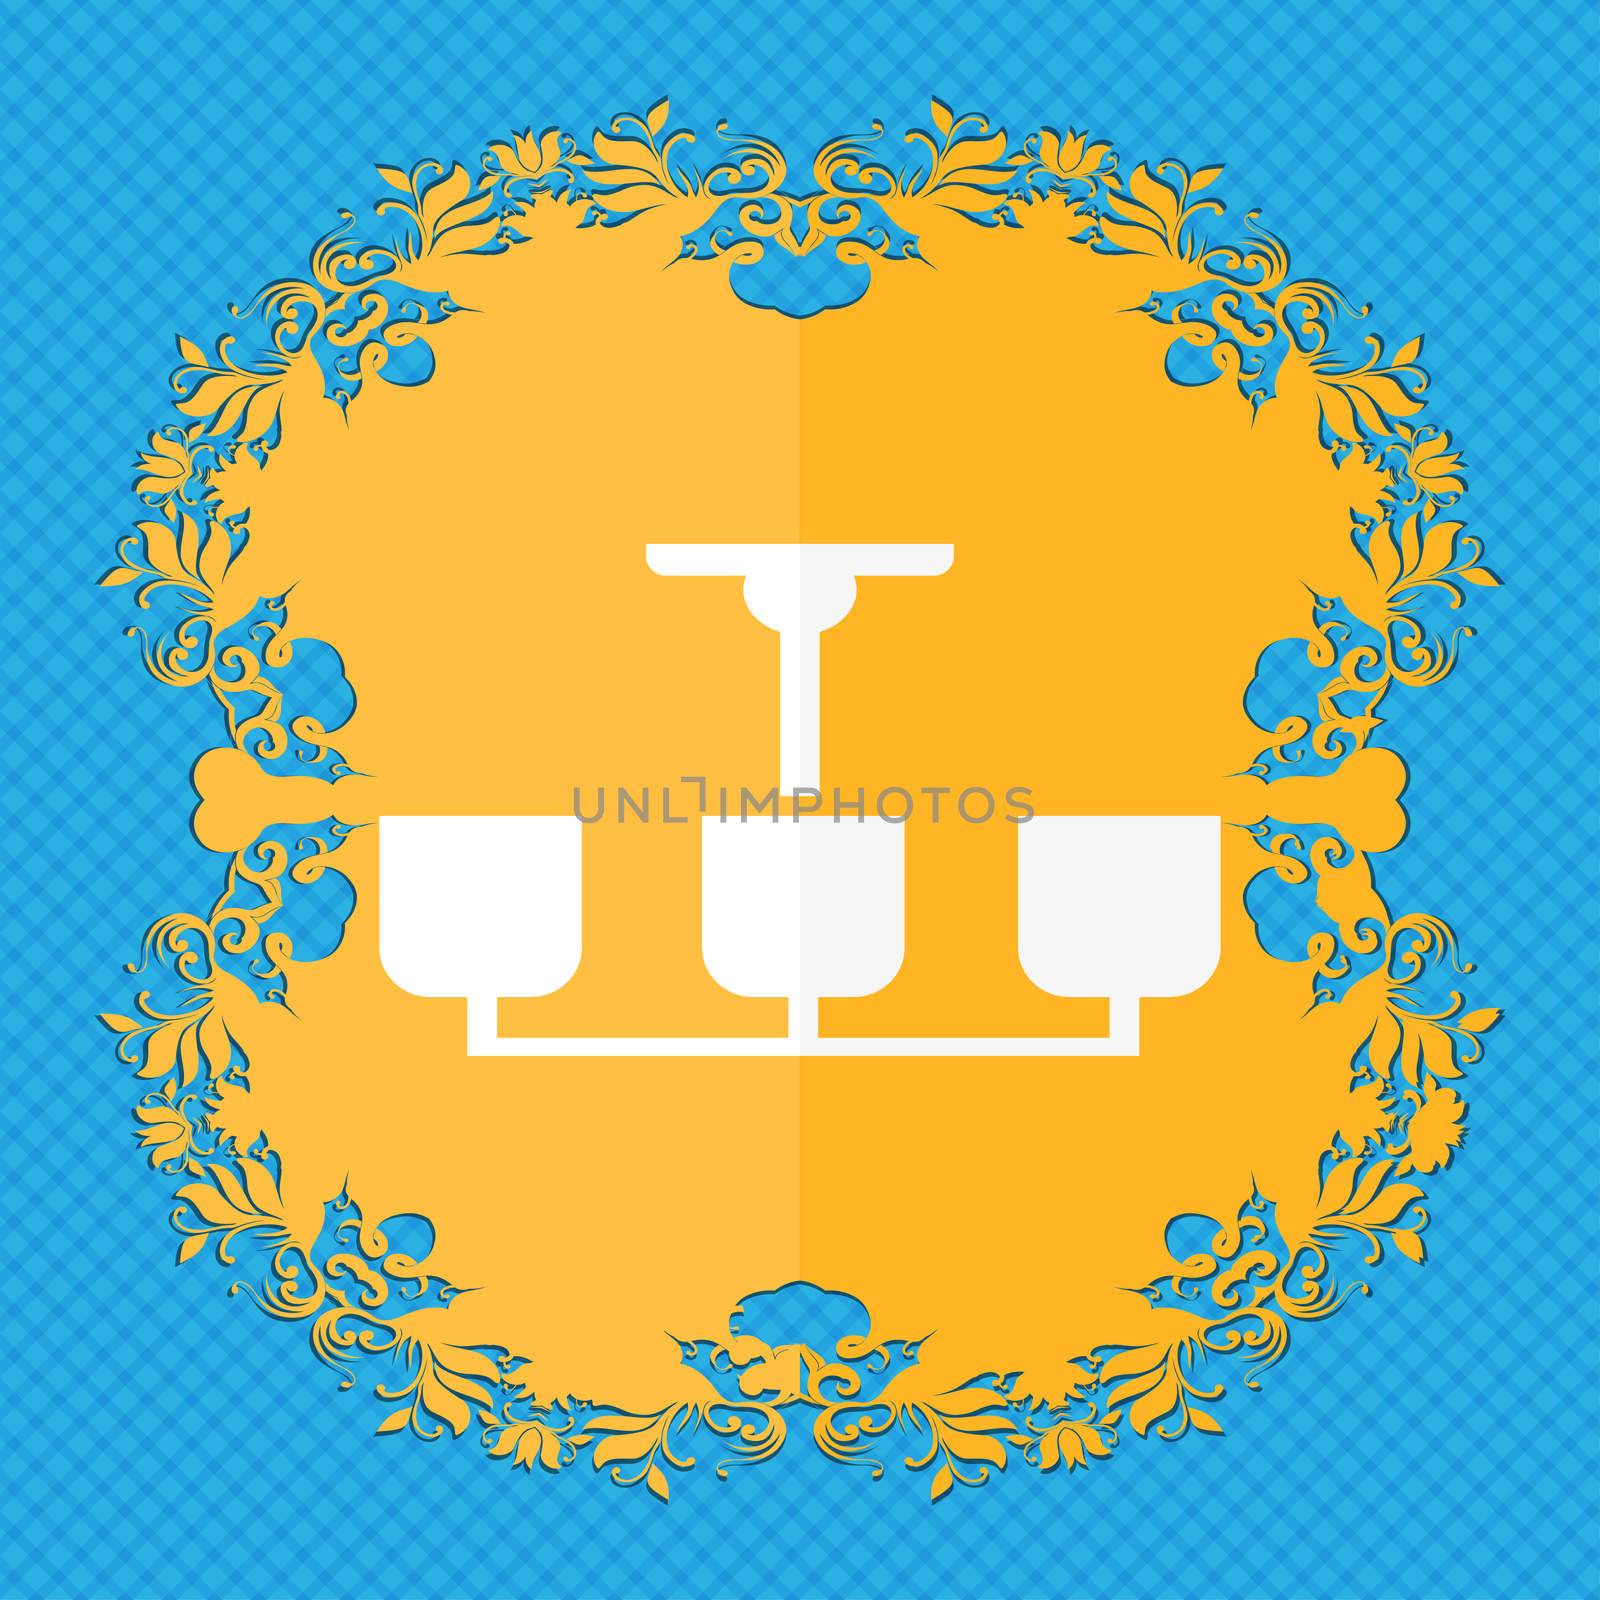 Chandelier Light Lamp icon sign. Floral flat design on a blue abstract background with place for your text.  by serhii_lohvyniuk